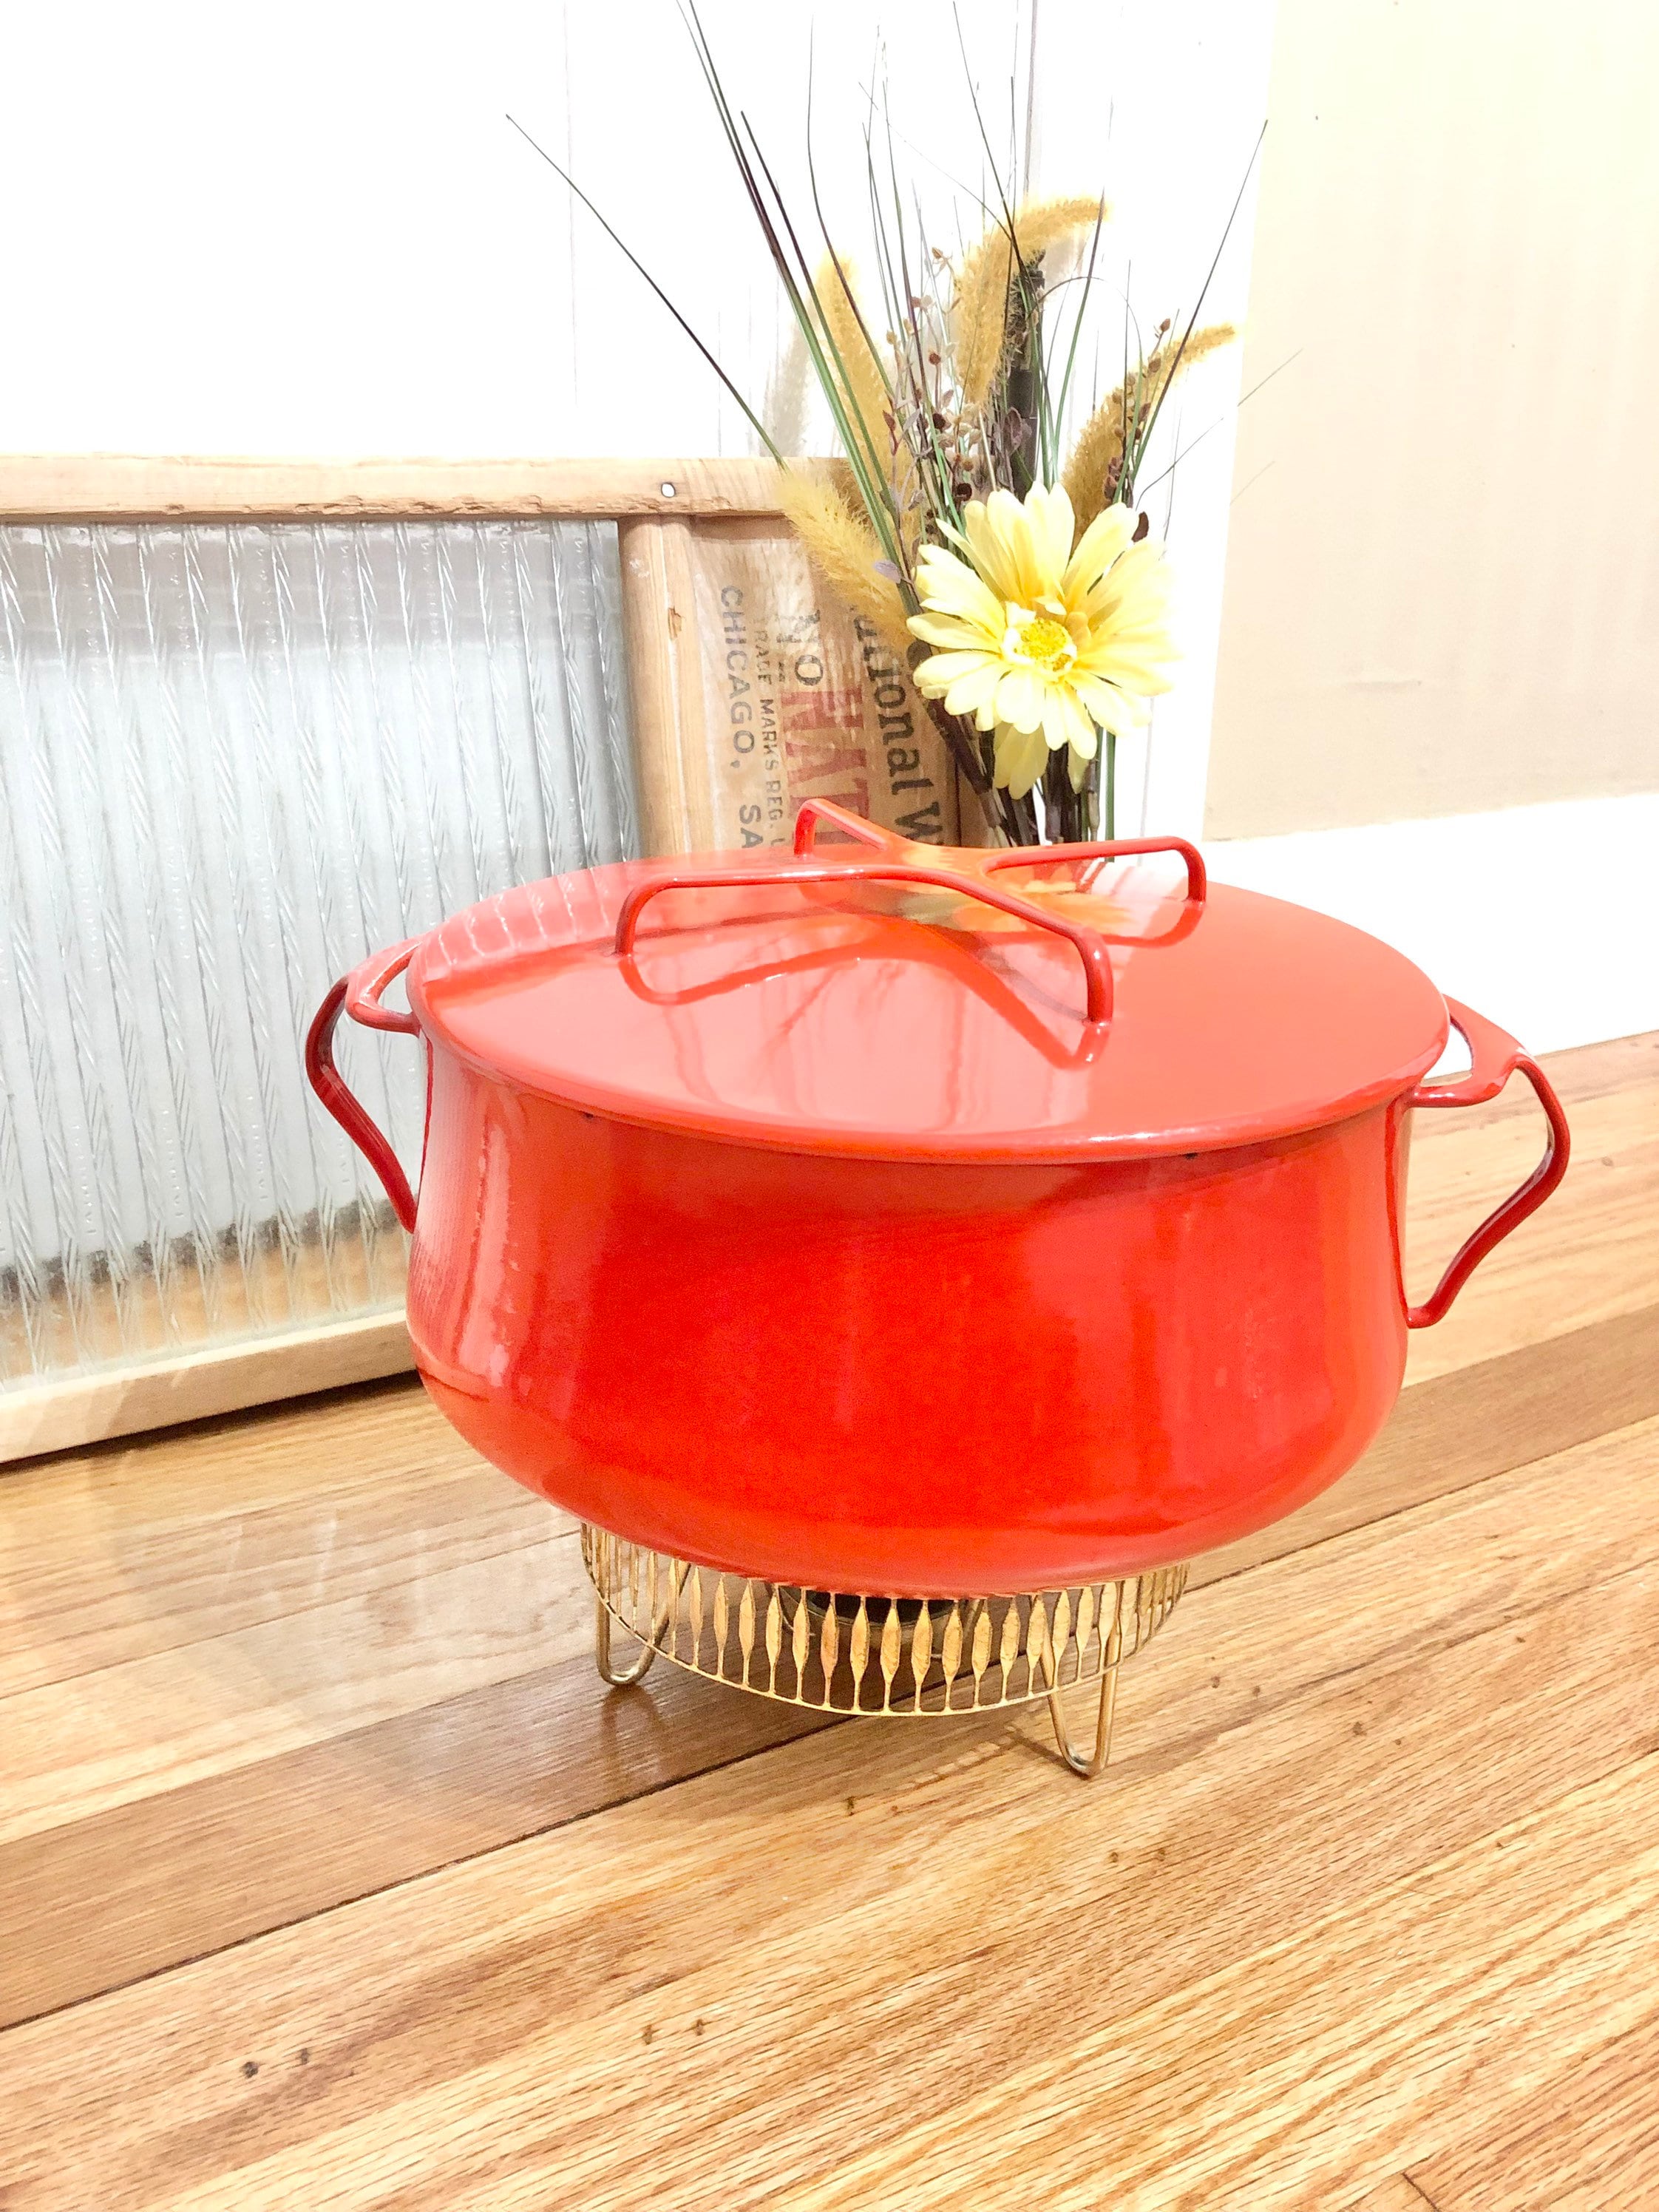 vintage retro cookware by Dansk and more - household items - by